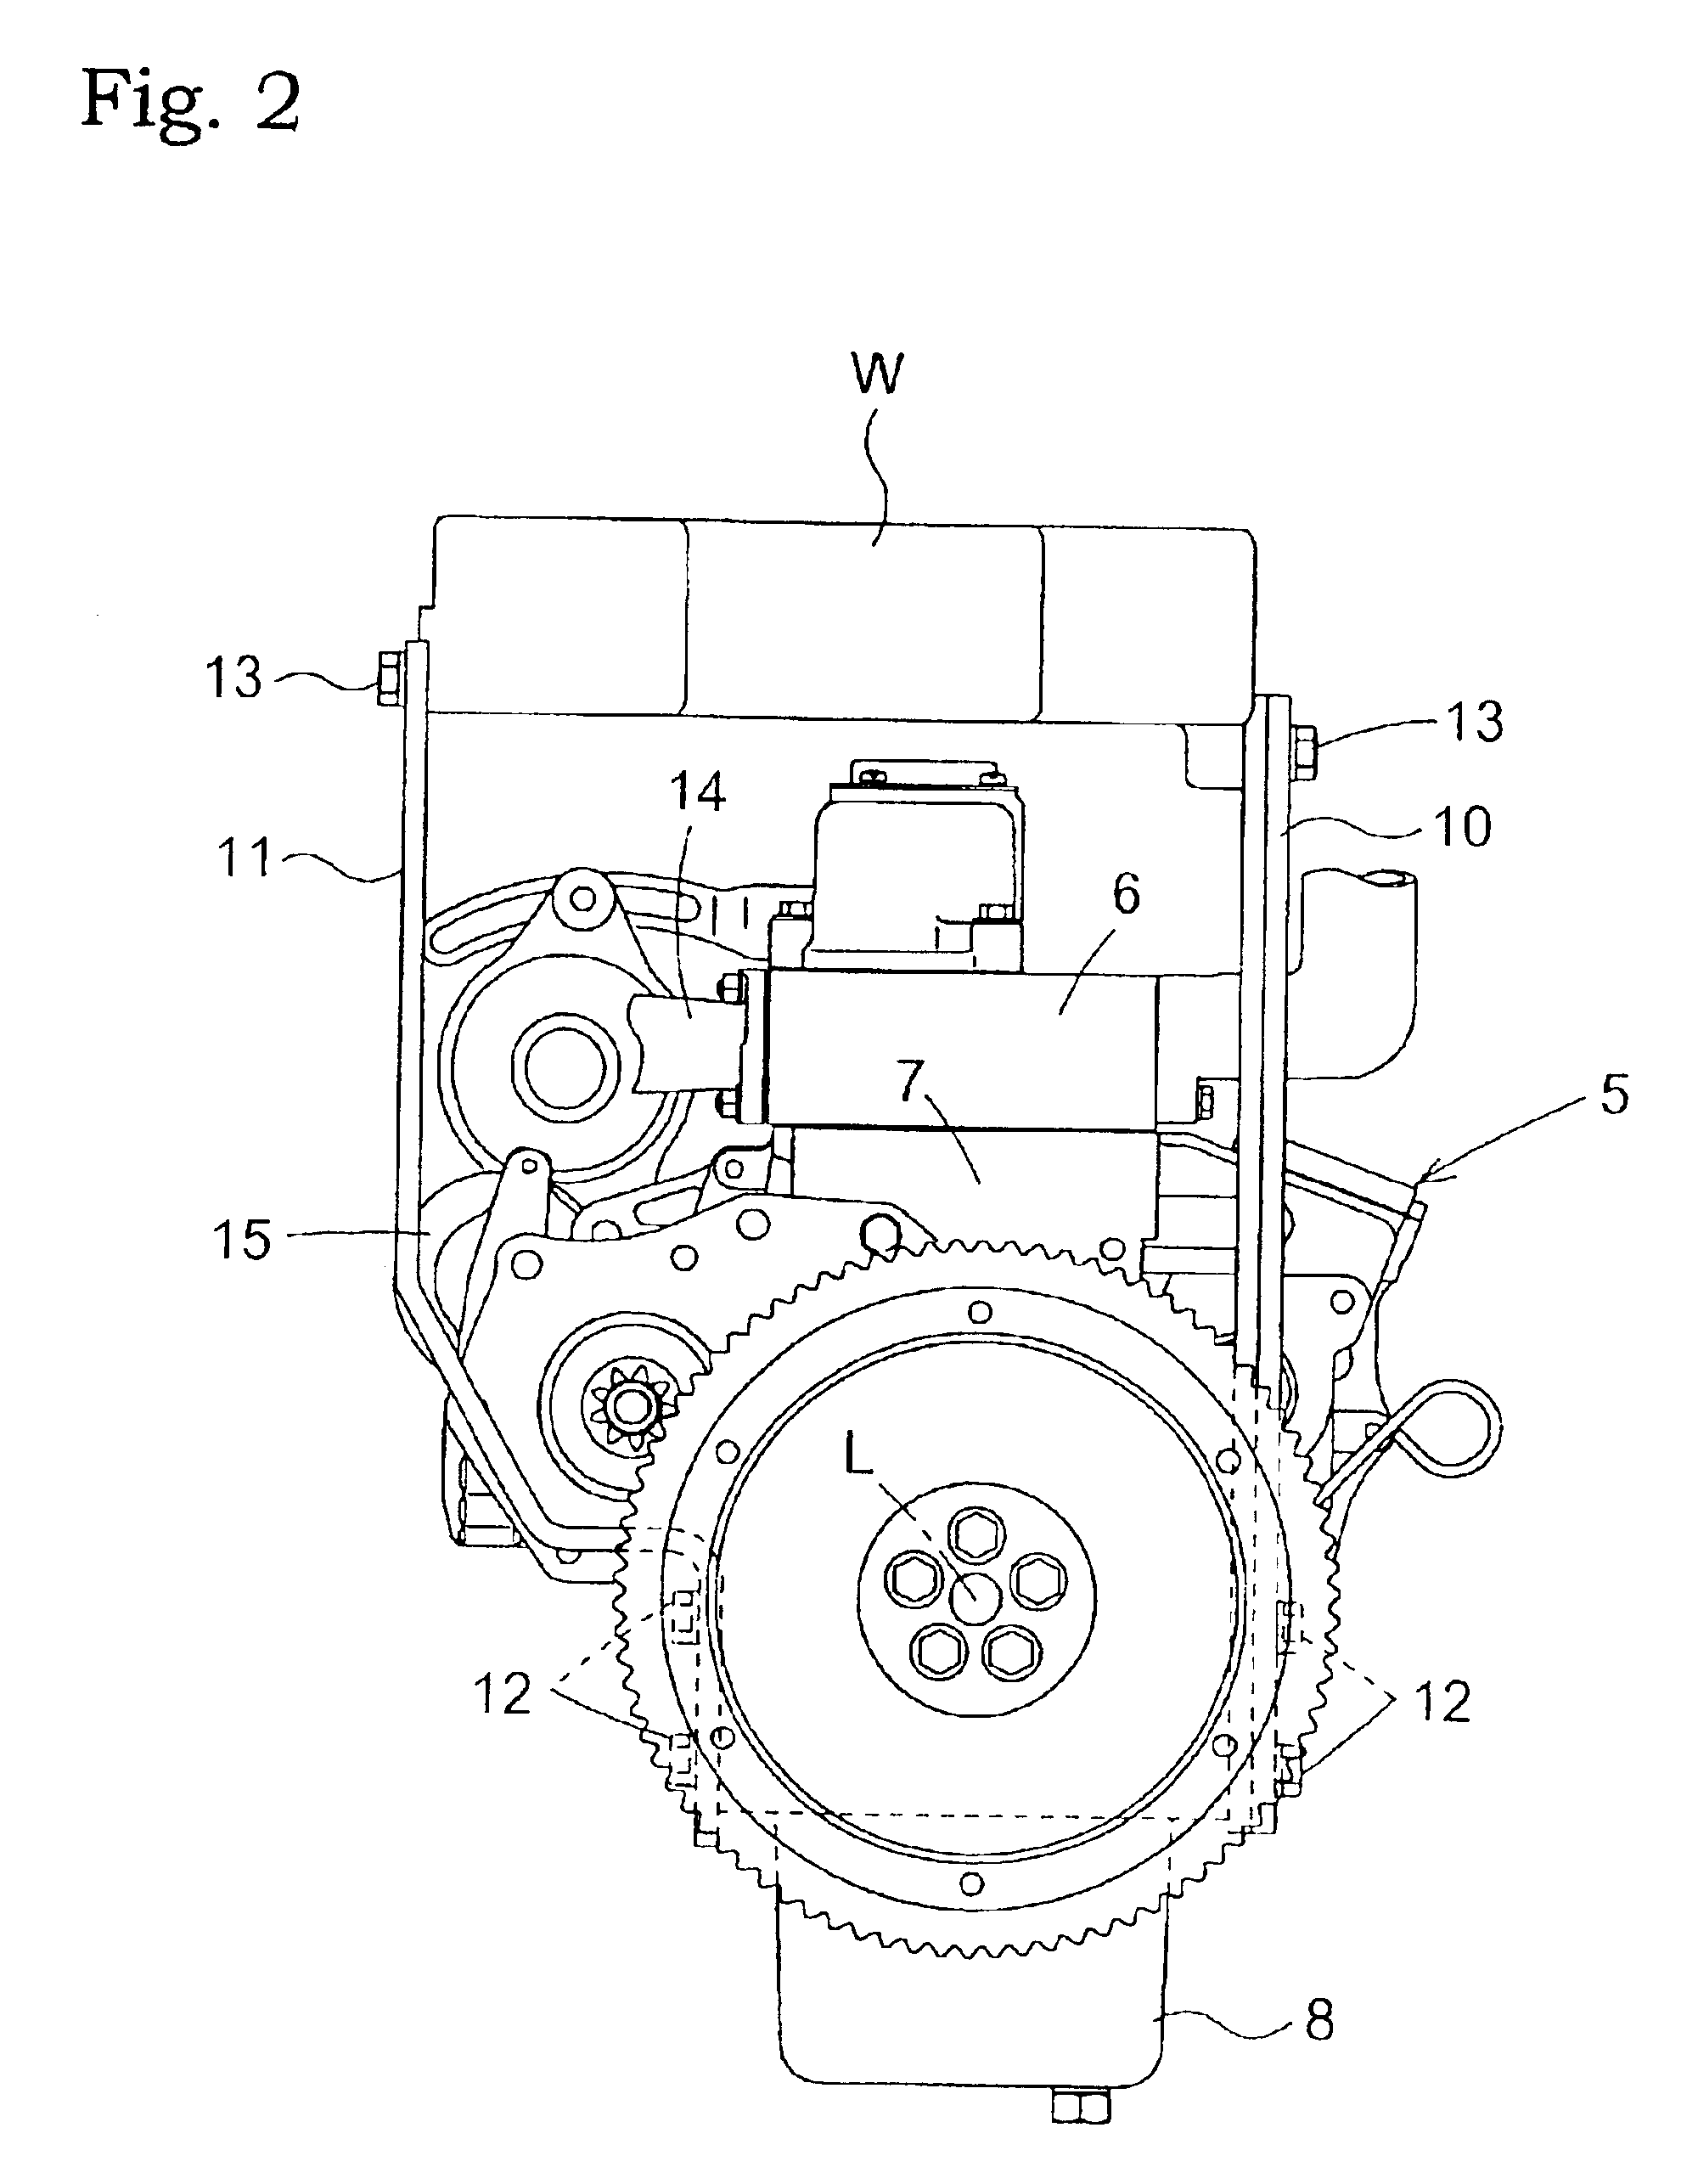 Vibration damping system for an engine mounted on a vehicle